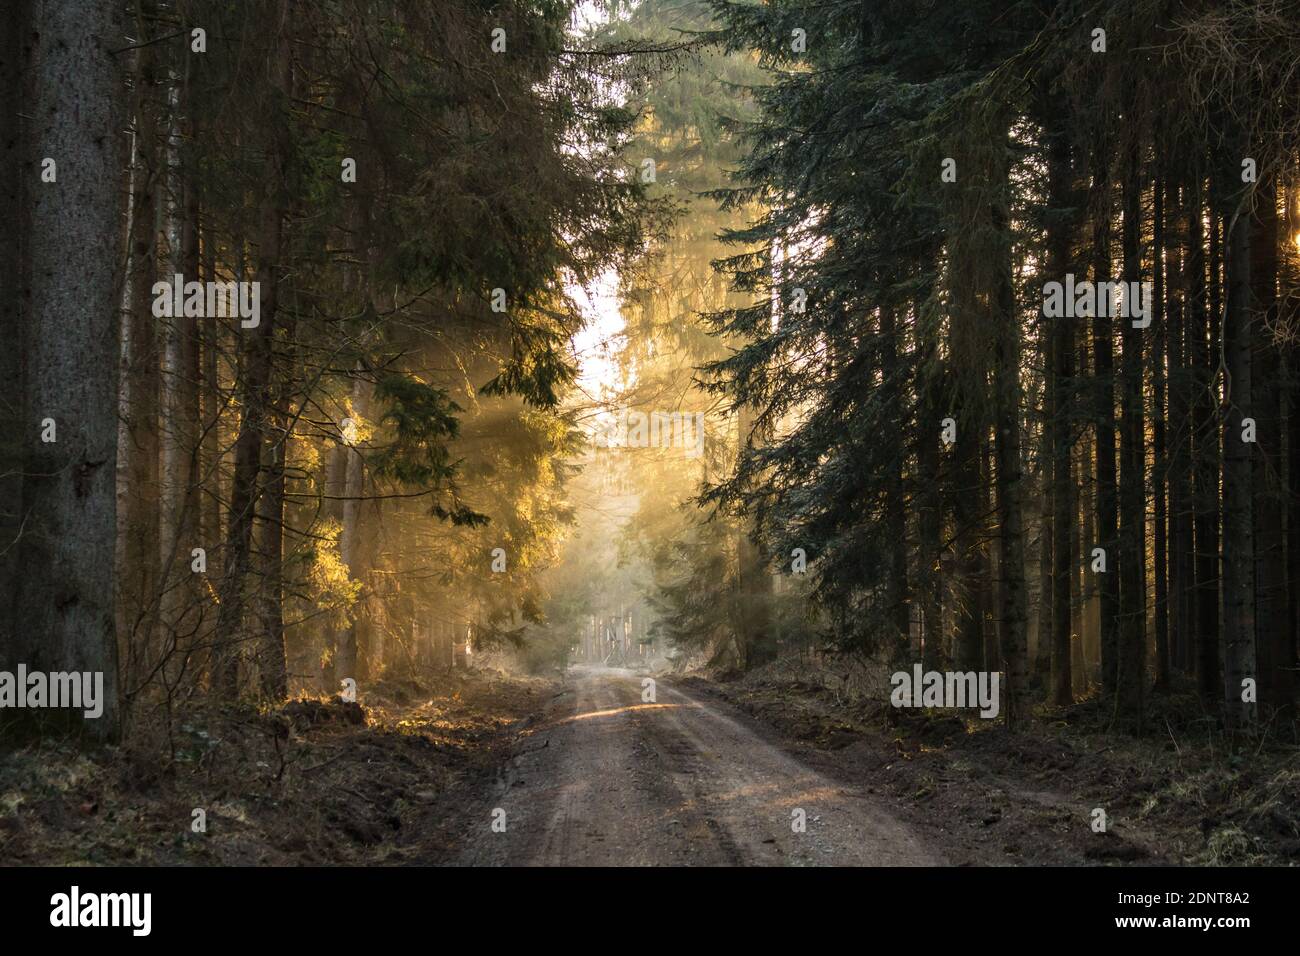 Dirt Road Amidst Trees In Forest Stock Photo